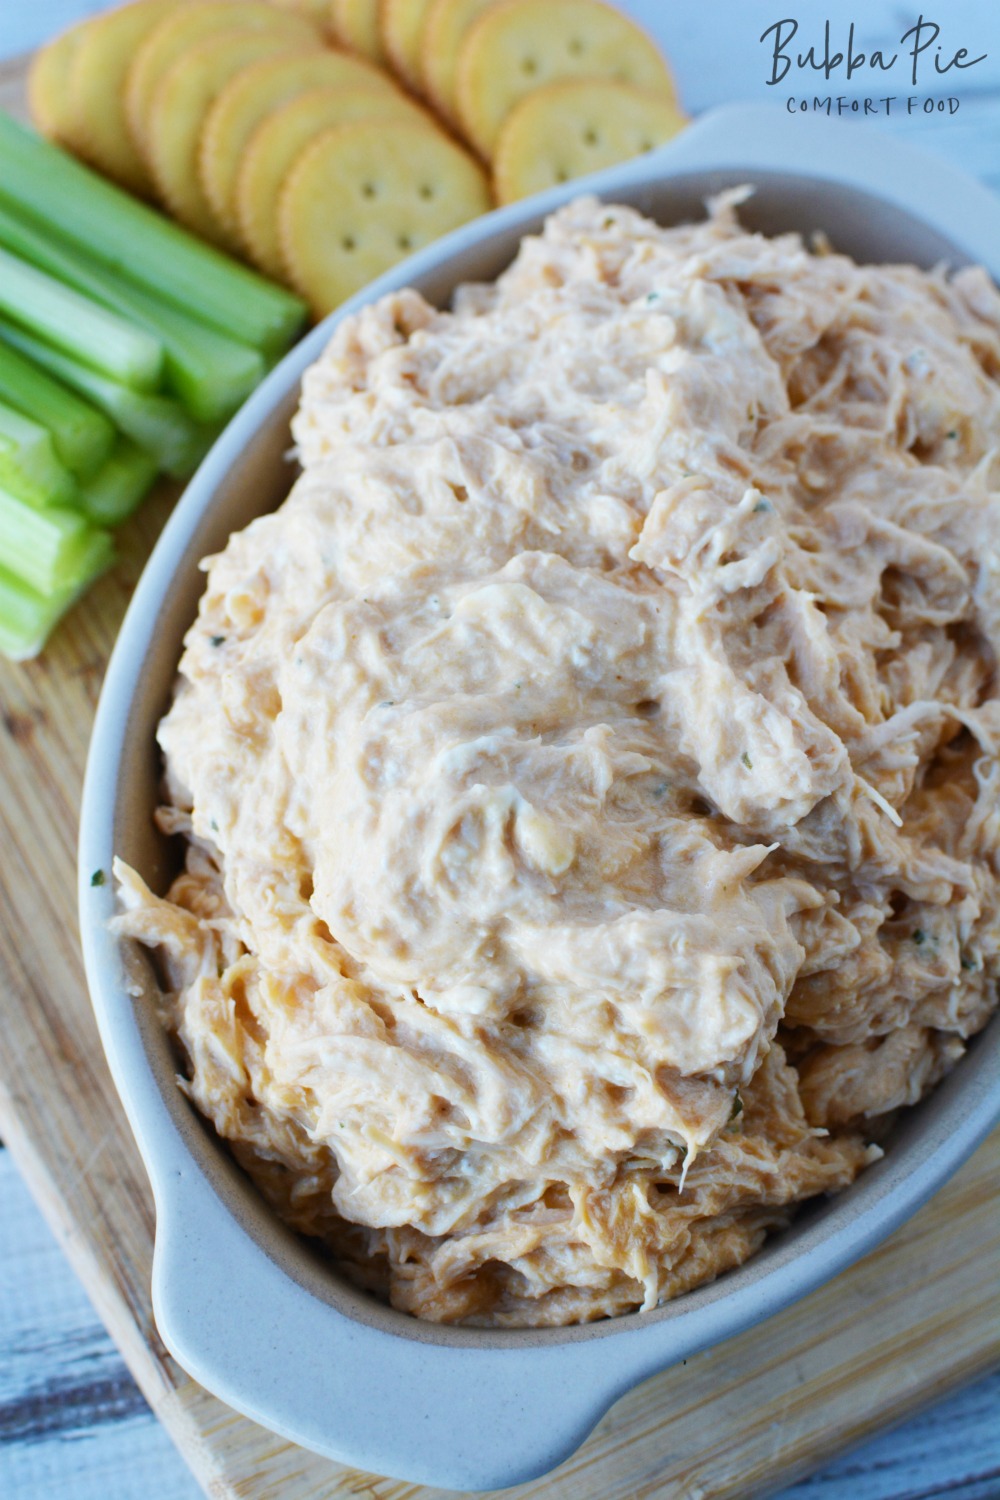 Slow Cooker Buffalo Chicken Dip is easy to share as an appetizer or game day snack